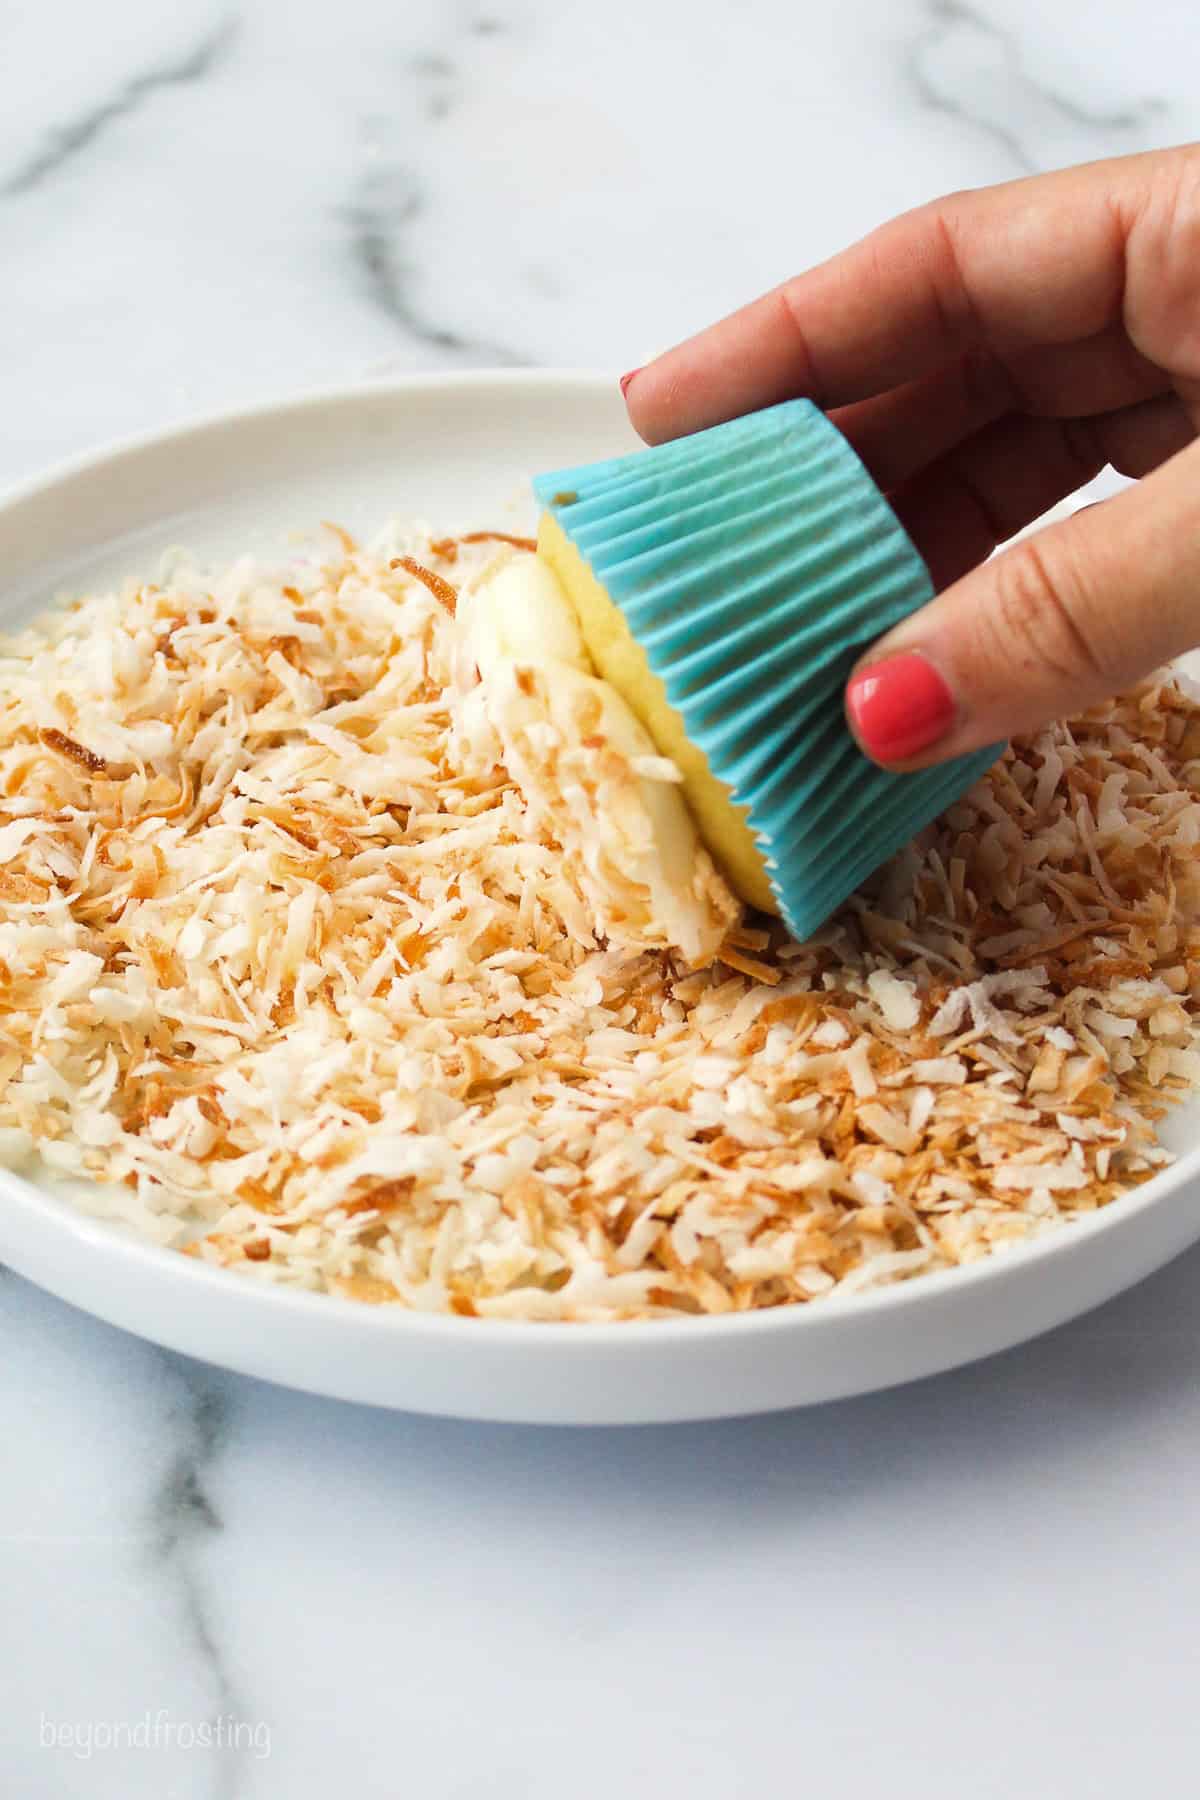 A hand rolling the top of a frosted cupcake into a shallow dish of toasted coconut.